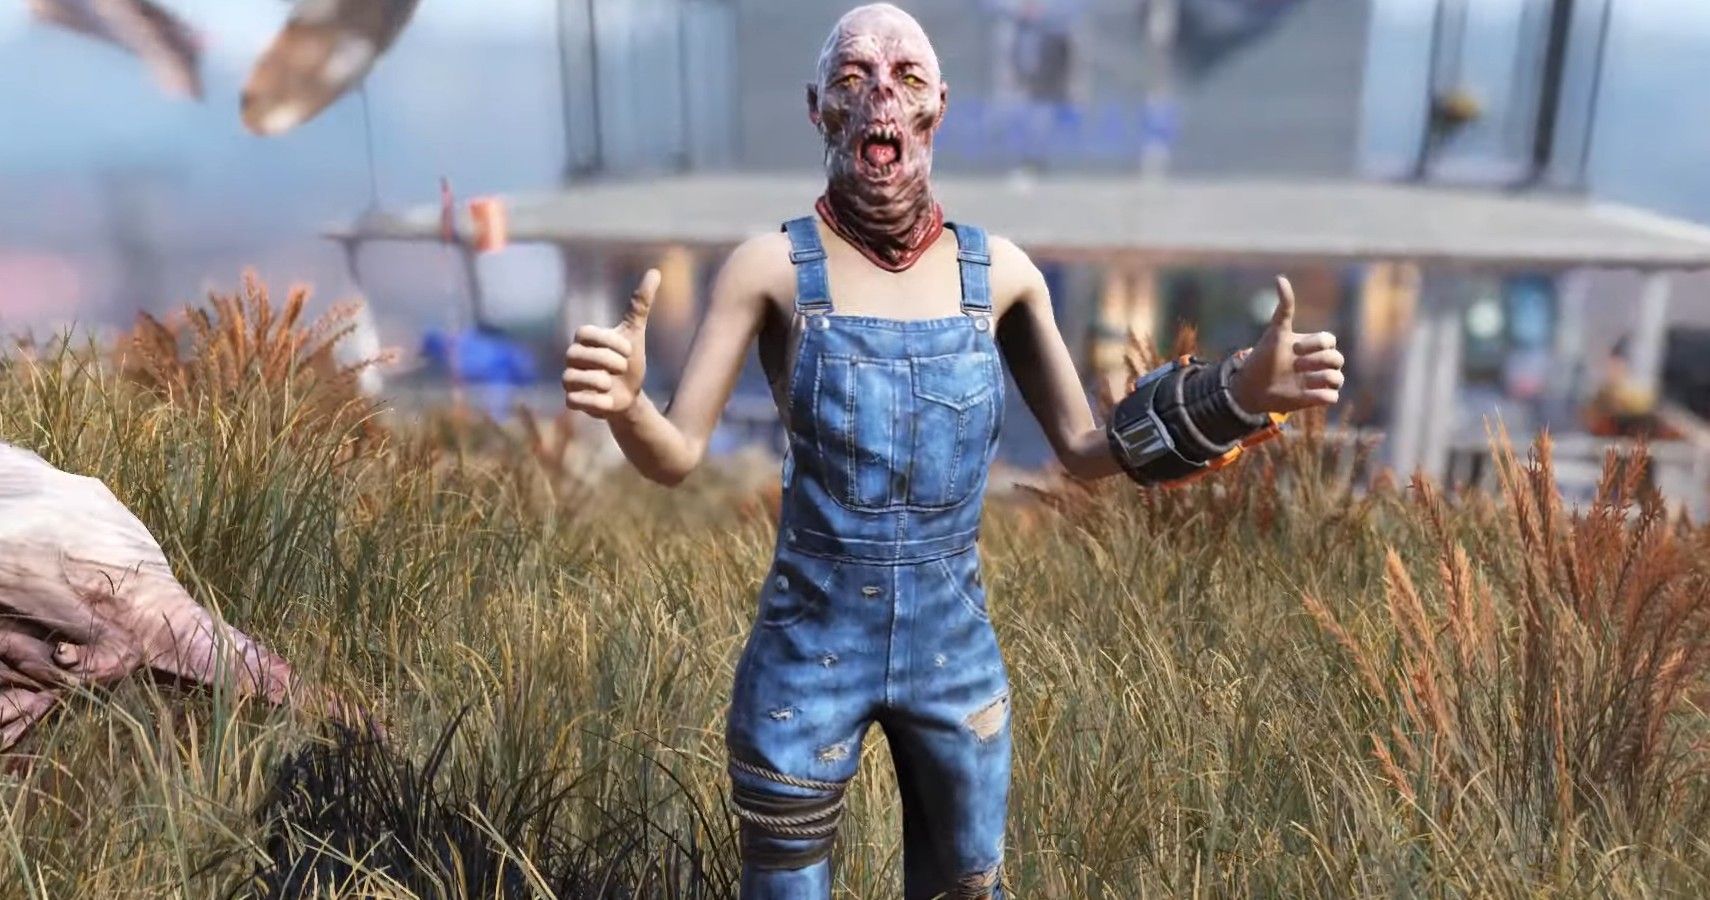 Gallery of Fallout 76 Ghouls.